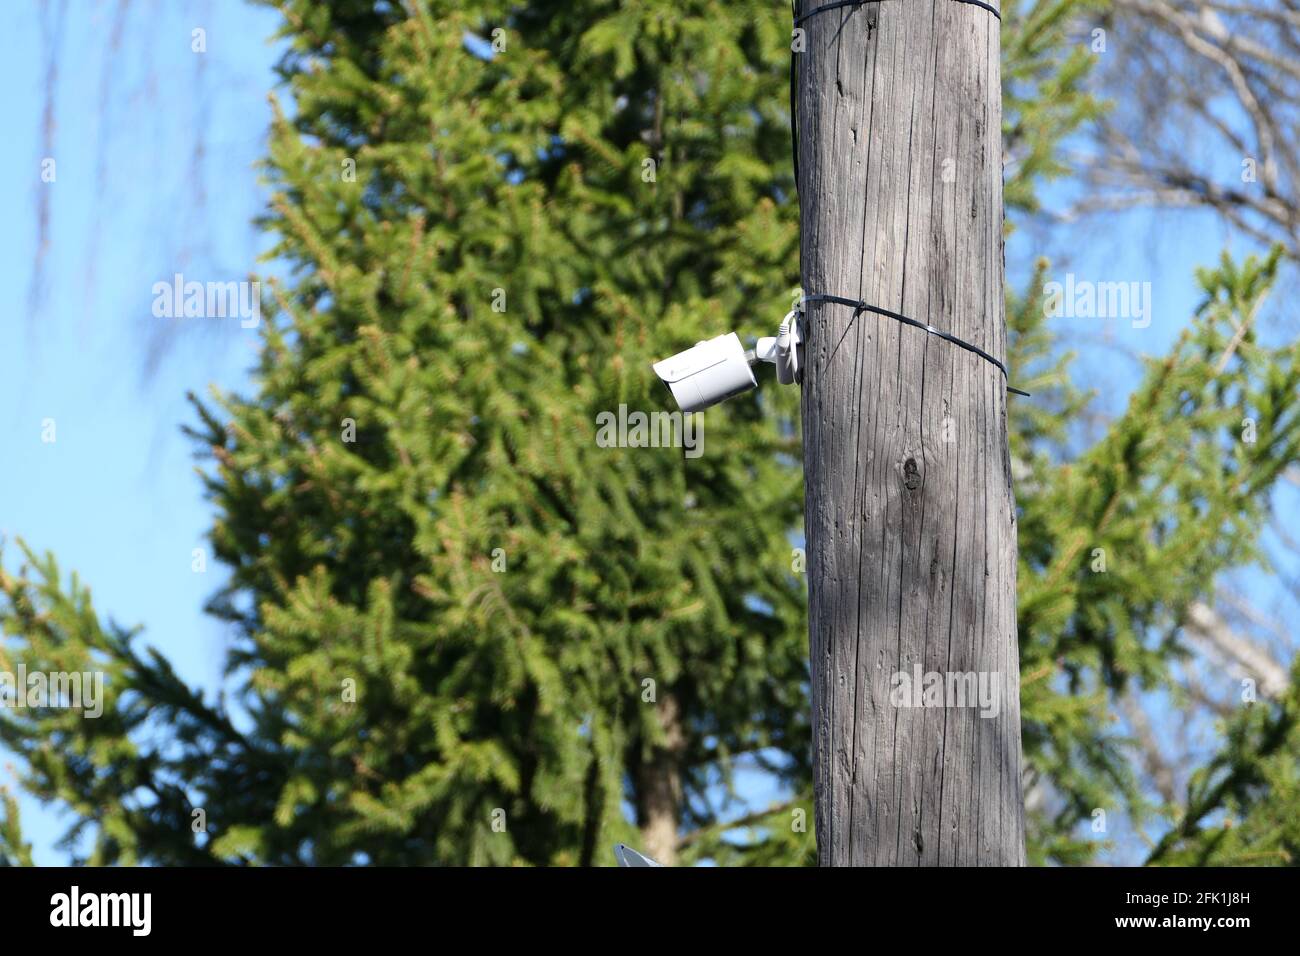 Outdoor security camera on a pole in the open air. Stock Photo